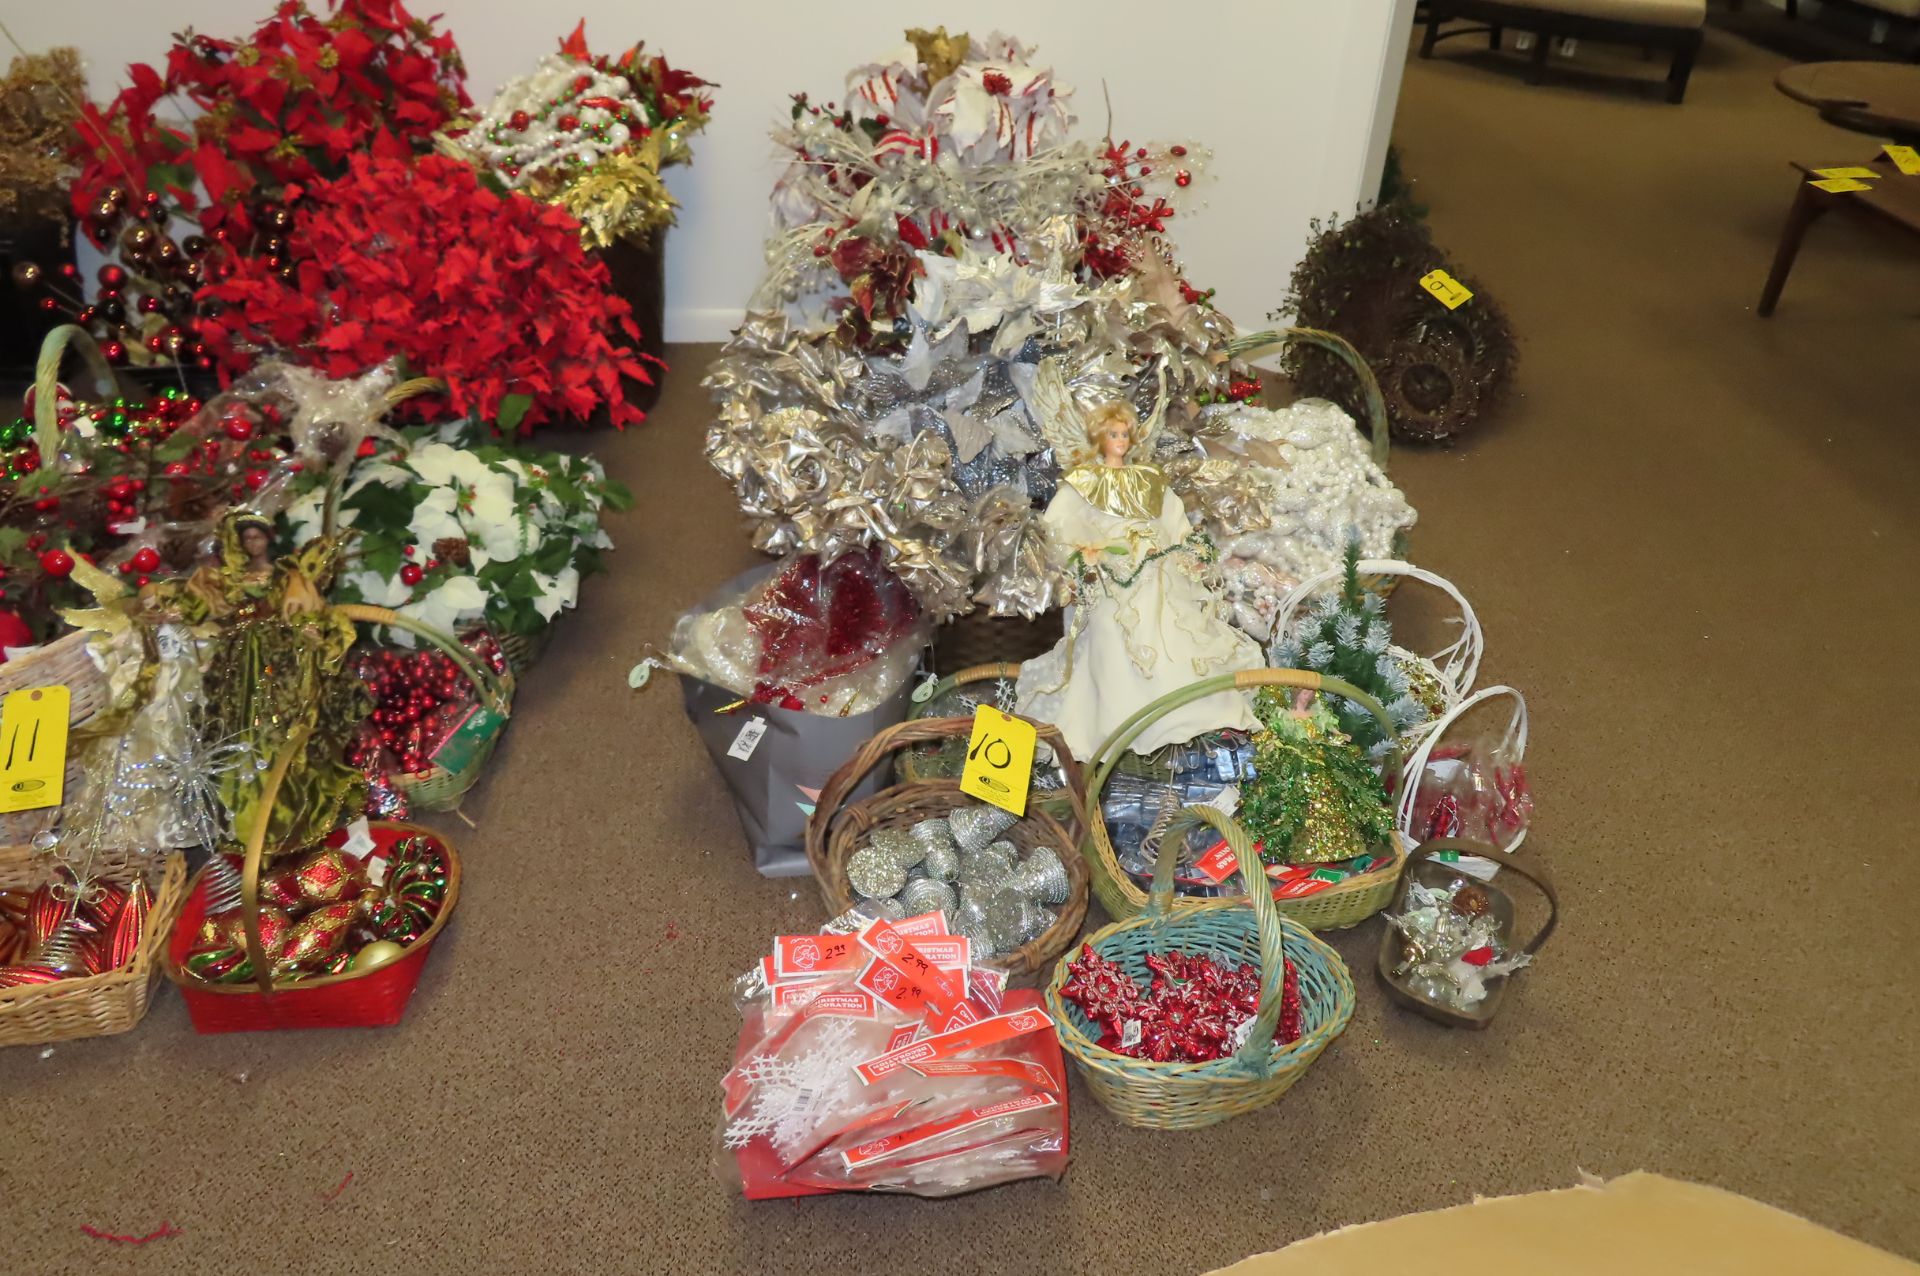 (1) XMAS ANGEL, ASST. FLOWERS AND ORNAMENTS AND (13) WICKER BASKETS